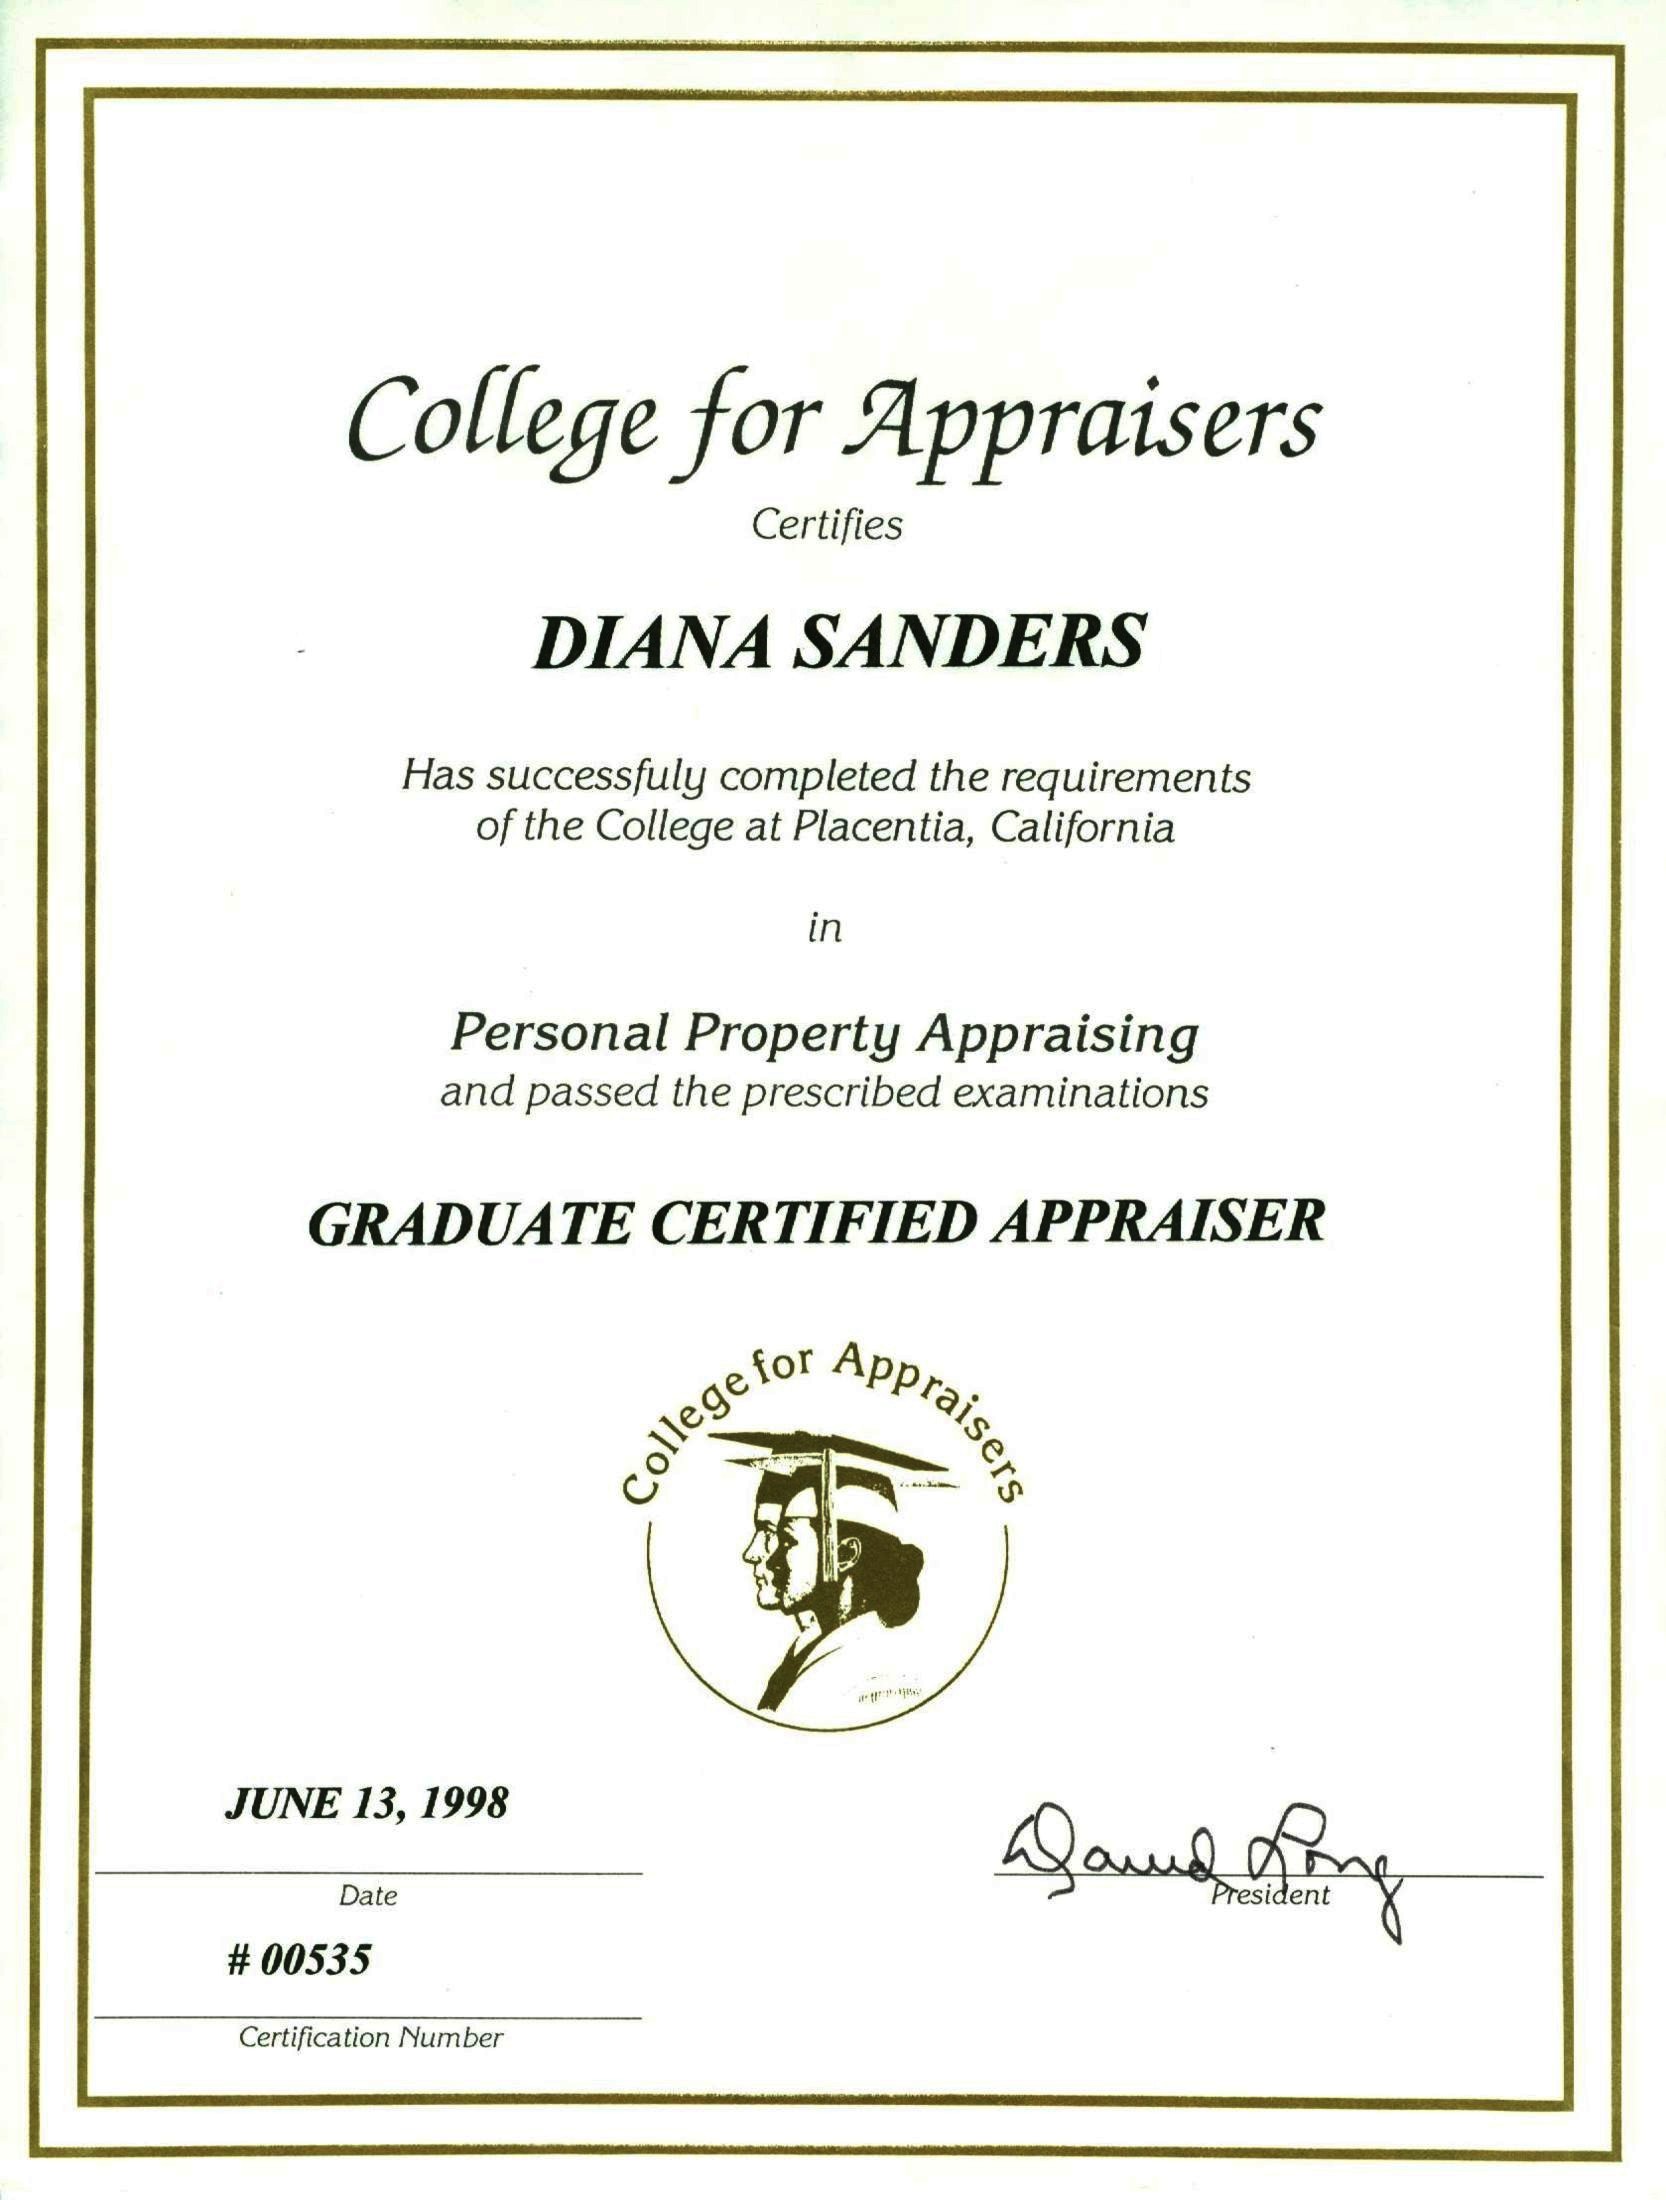 College for Appraisers, Graduate Certified Appraiser